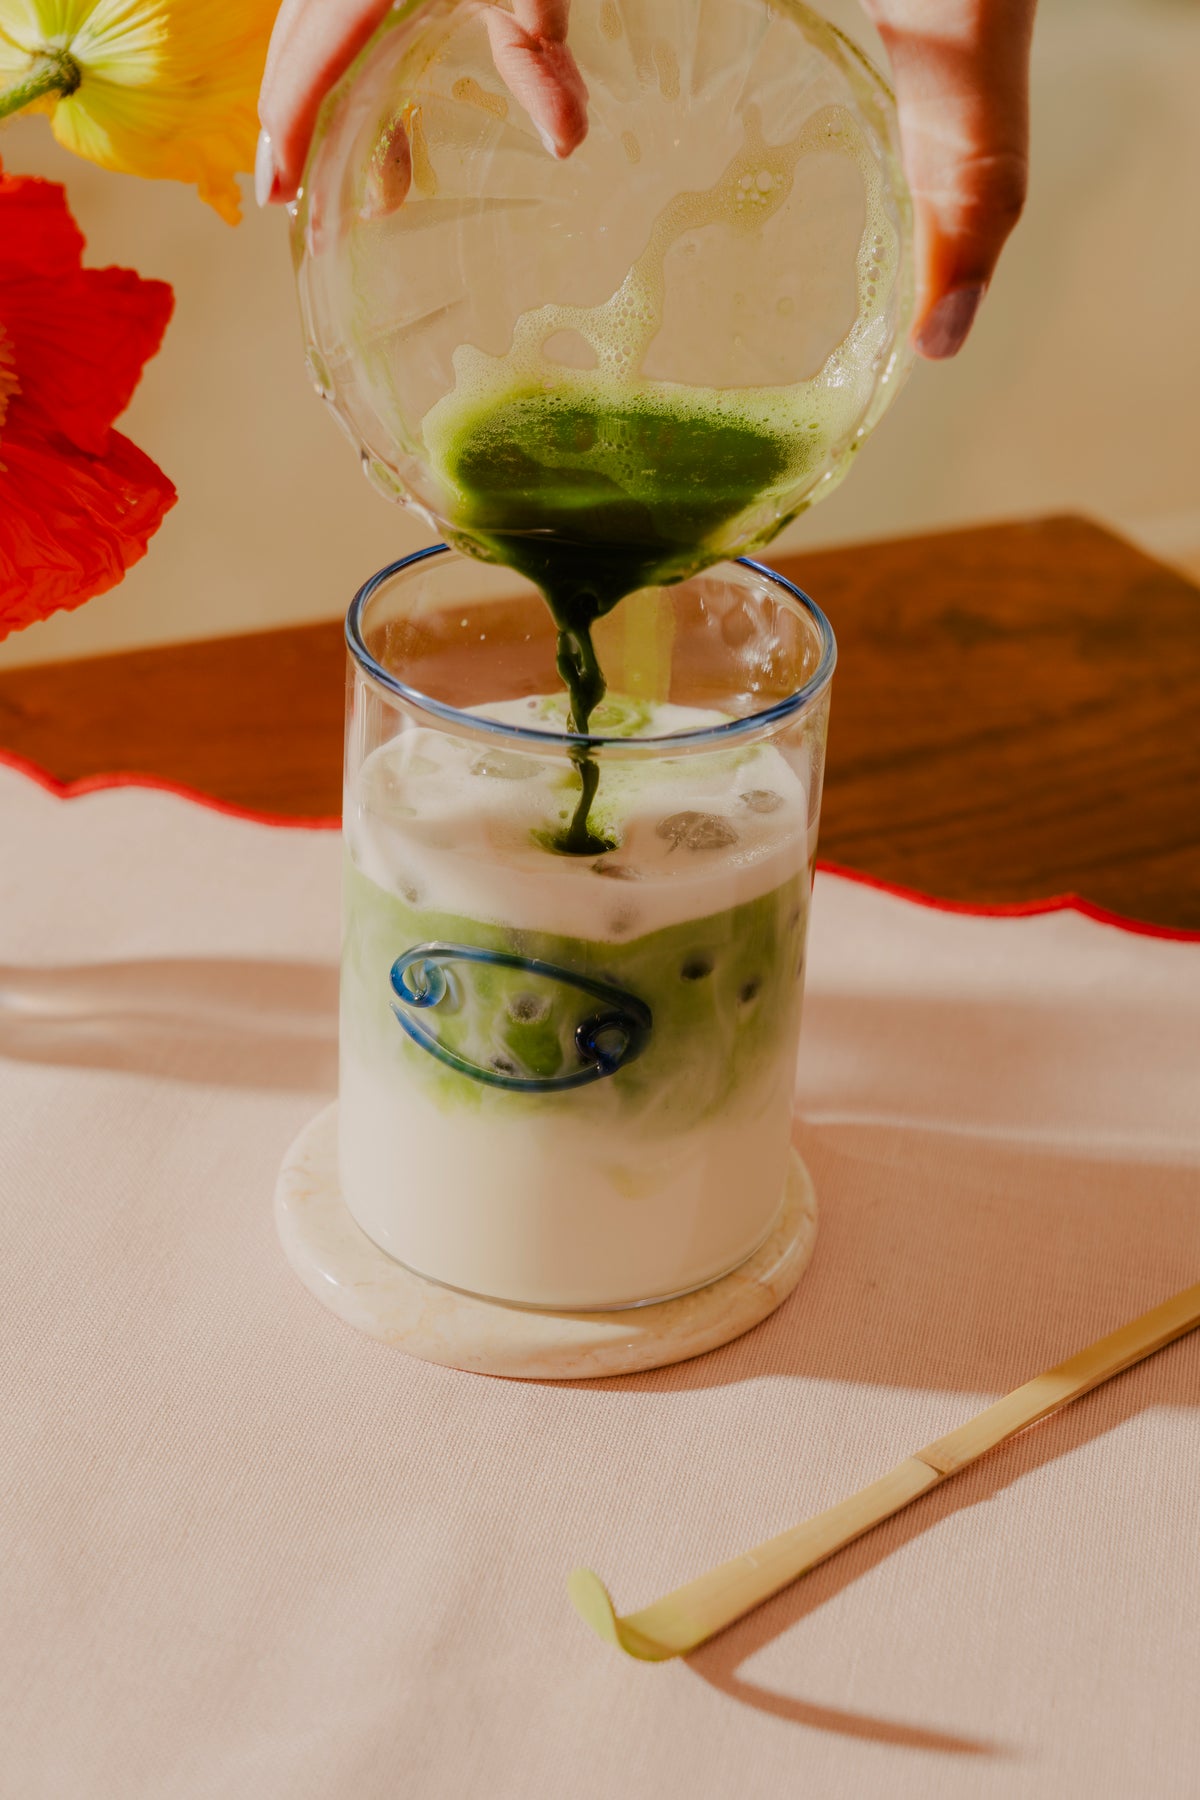 A hand is pouring a vivid matcha into a lowball glass filled with a well frothed oat milk, creating a striking green swirl as it blends. The glass has a blue Cancer zodiac symbol, and sits on a marble coaster on a wooden table with a beige cloth surface. A single lemongrass stalk lies in the foreground, leaning against the coaster. Brightly colored poppies are softly blurred in the background, adding a pop of red and yellow to the composition.